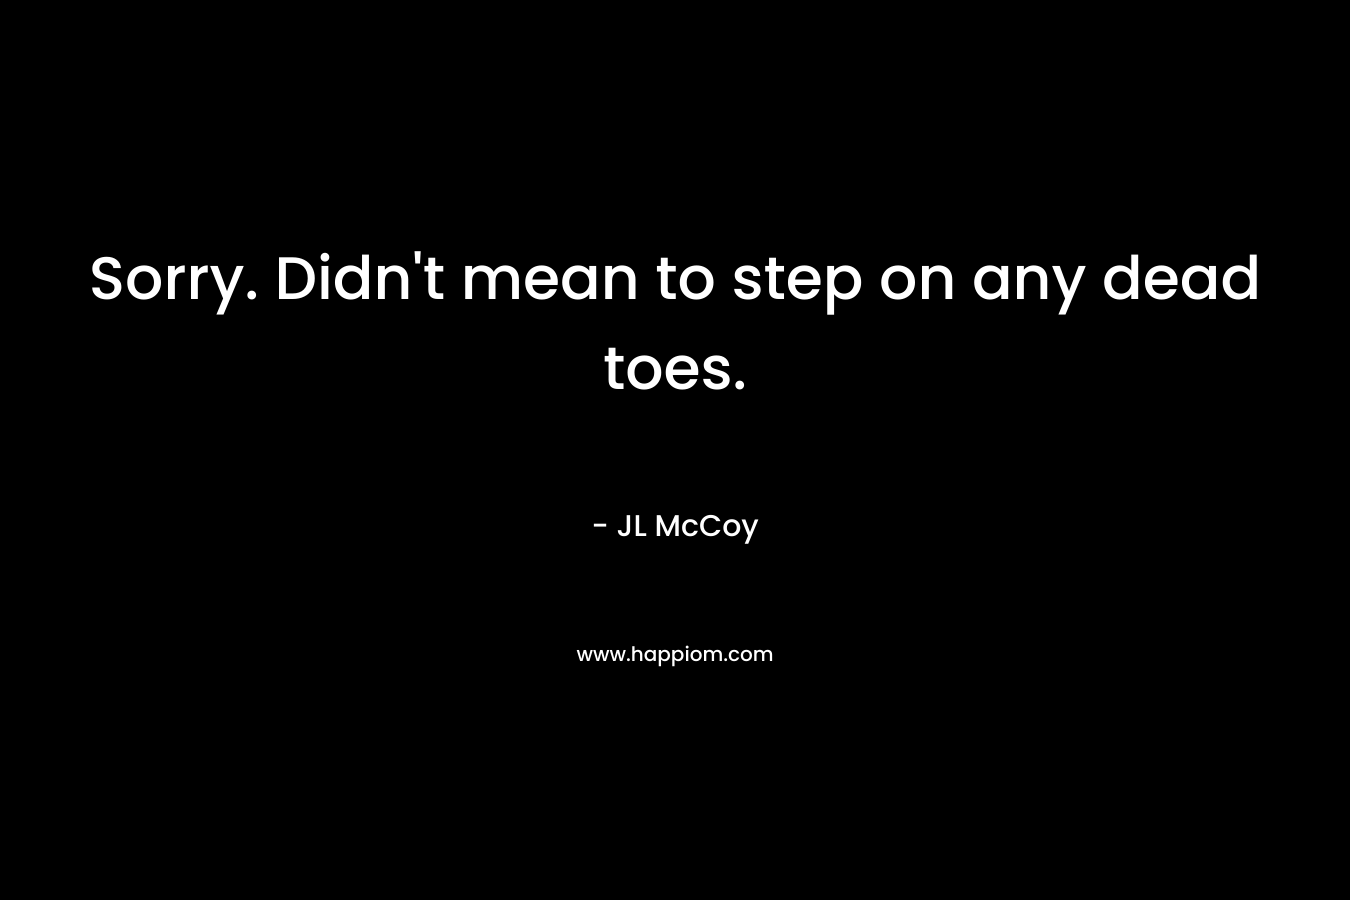 Sorry. Didn’t mean to step on any dead toes. – JL McCoy